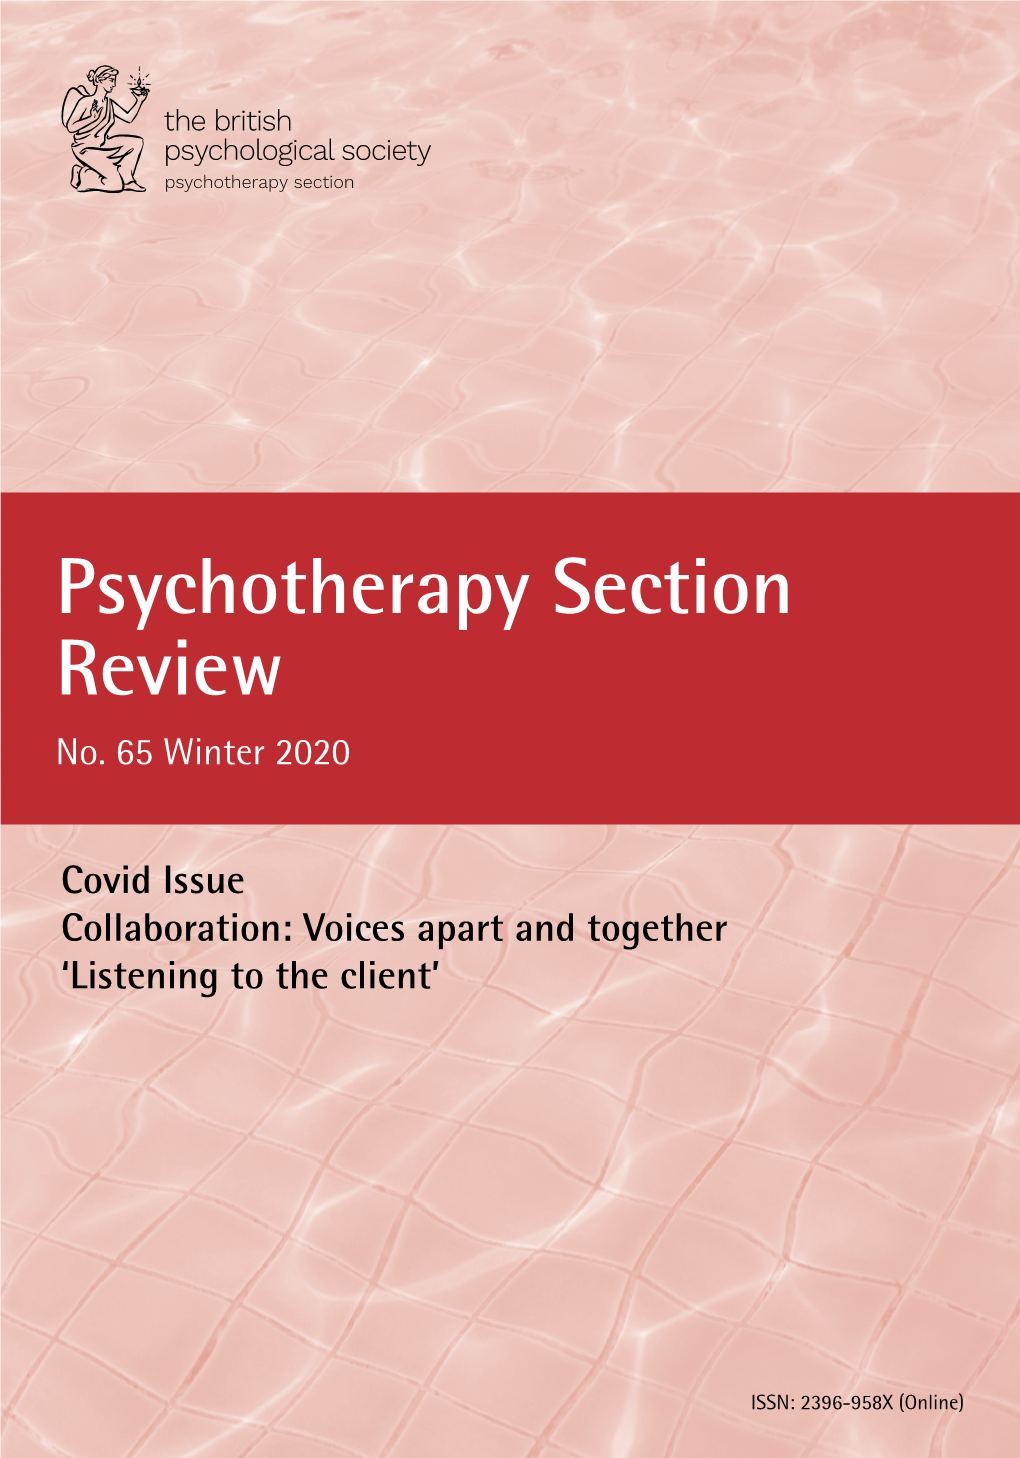 BPS Psychotherapy Section Review